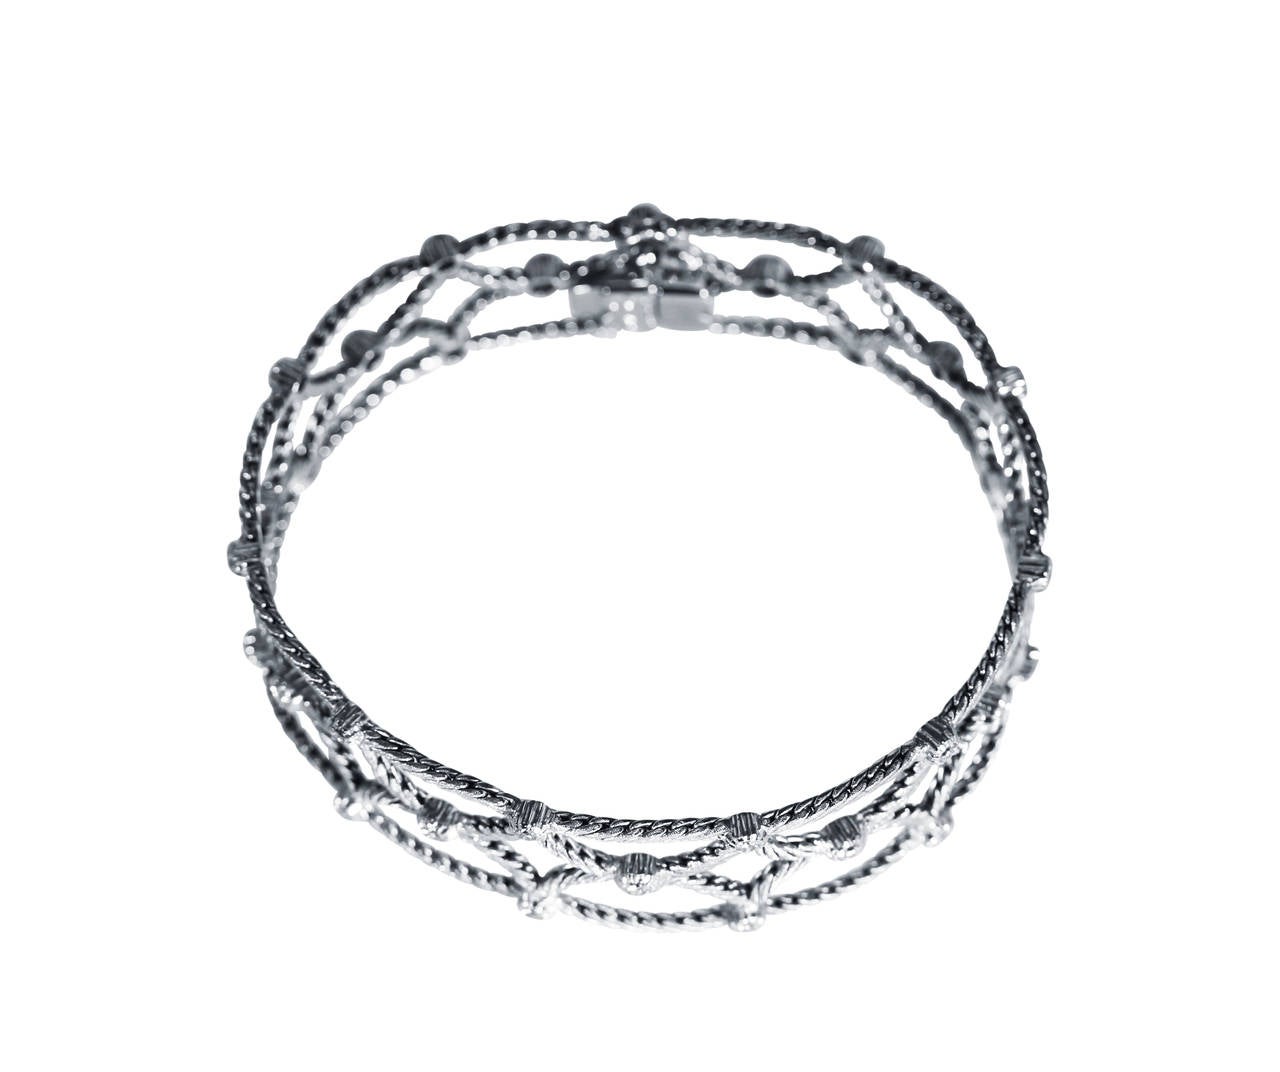 An 18 karat white gold and diamond bracelet by Buccellati, Italy, of lattice and swag design composed of white gold rope twist links accented by 33 round diamonds weighing approximately 1.50 carats, gross weight 25.6 grams, length 7 inches, width